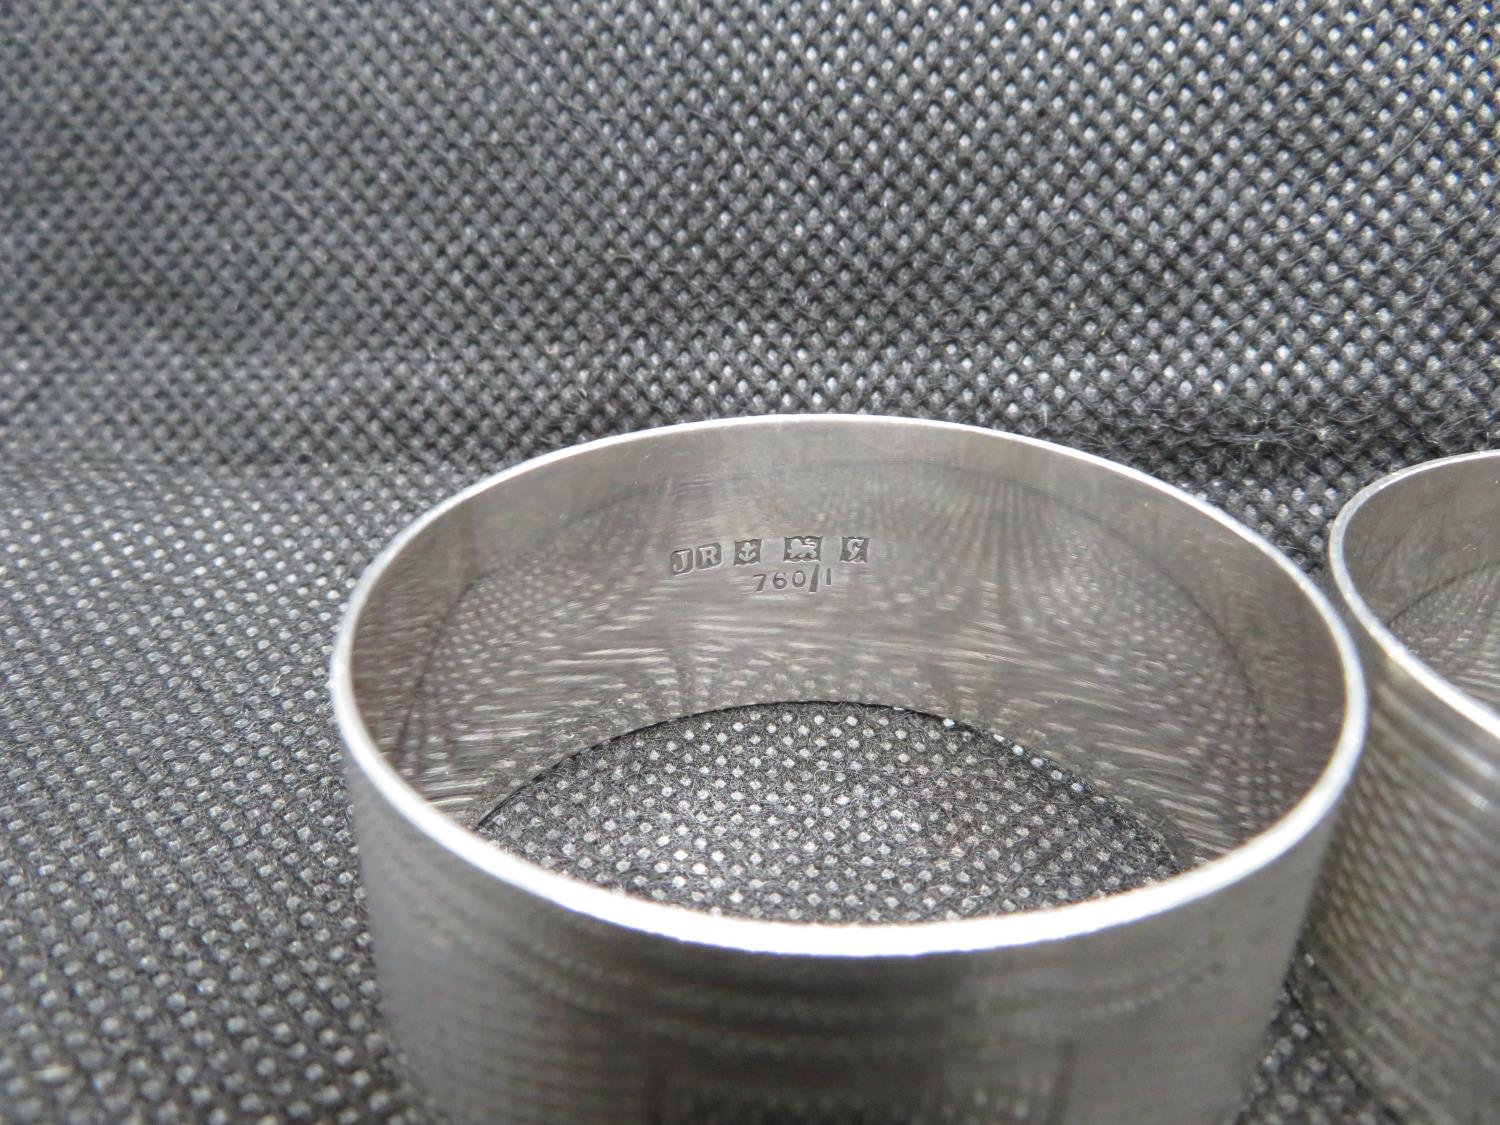 Set of 3x silver napkin rings 50g total weight - Image 2 of 3